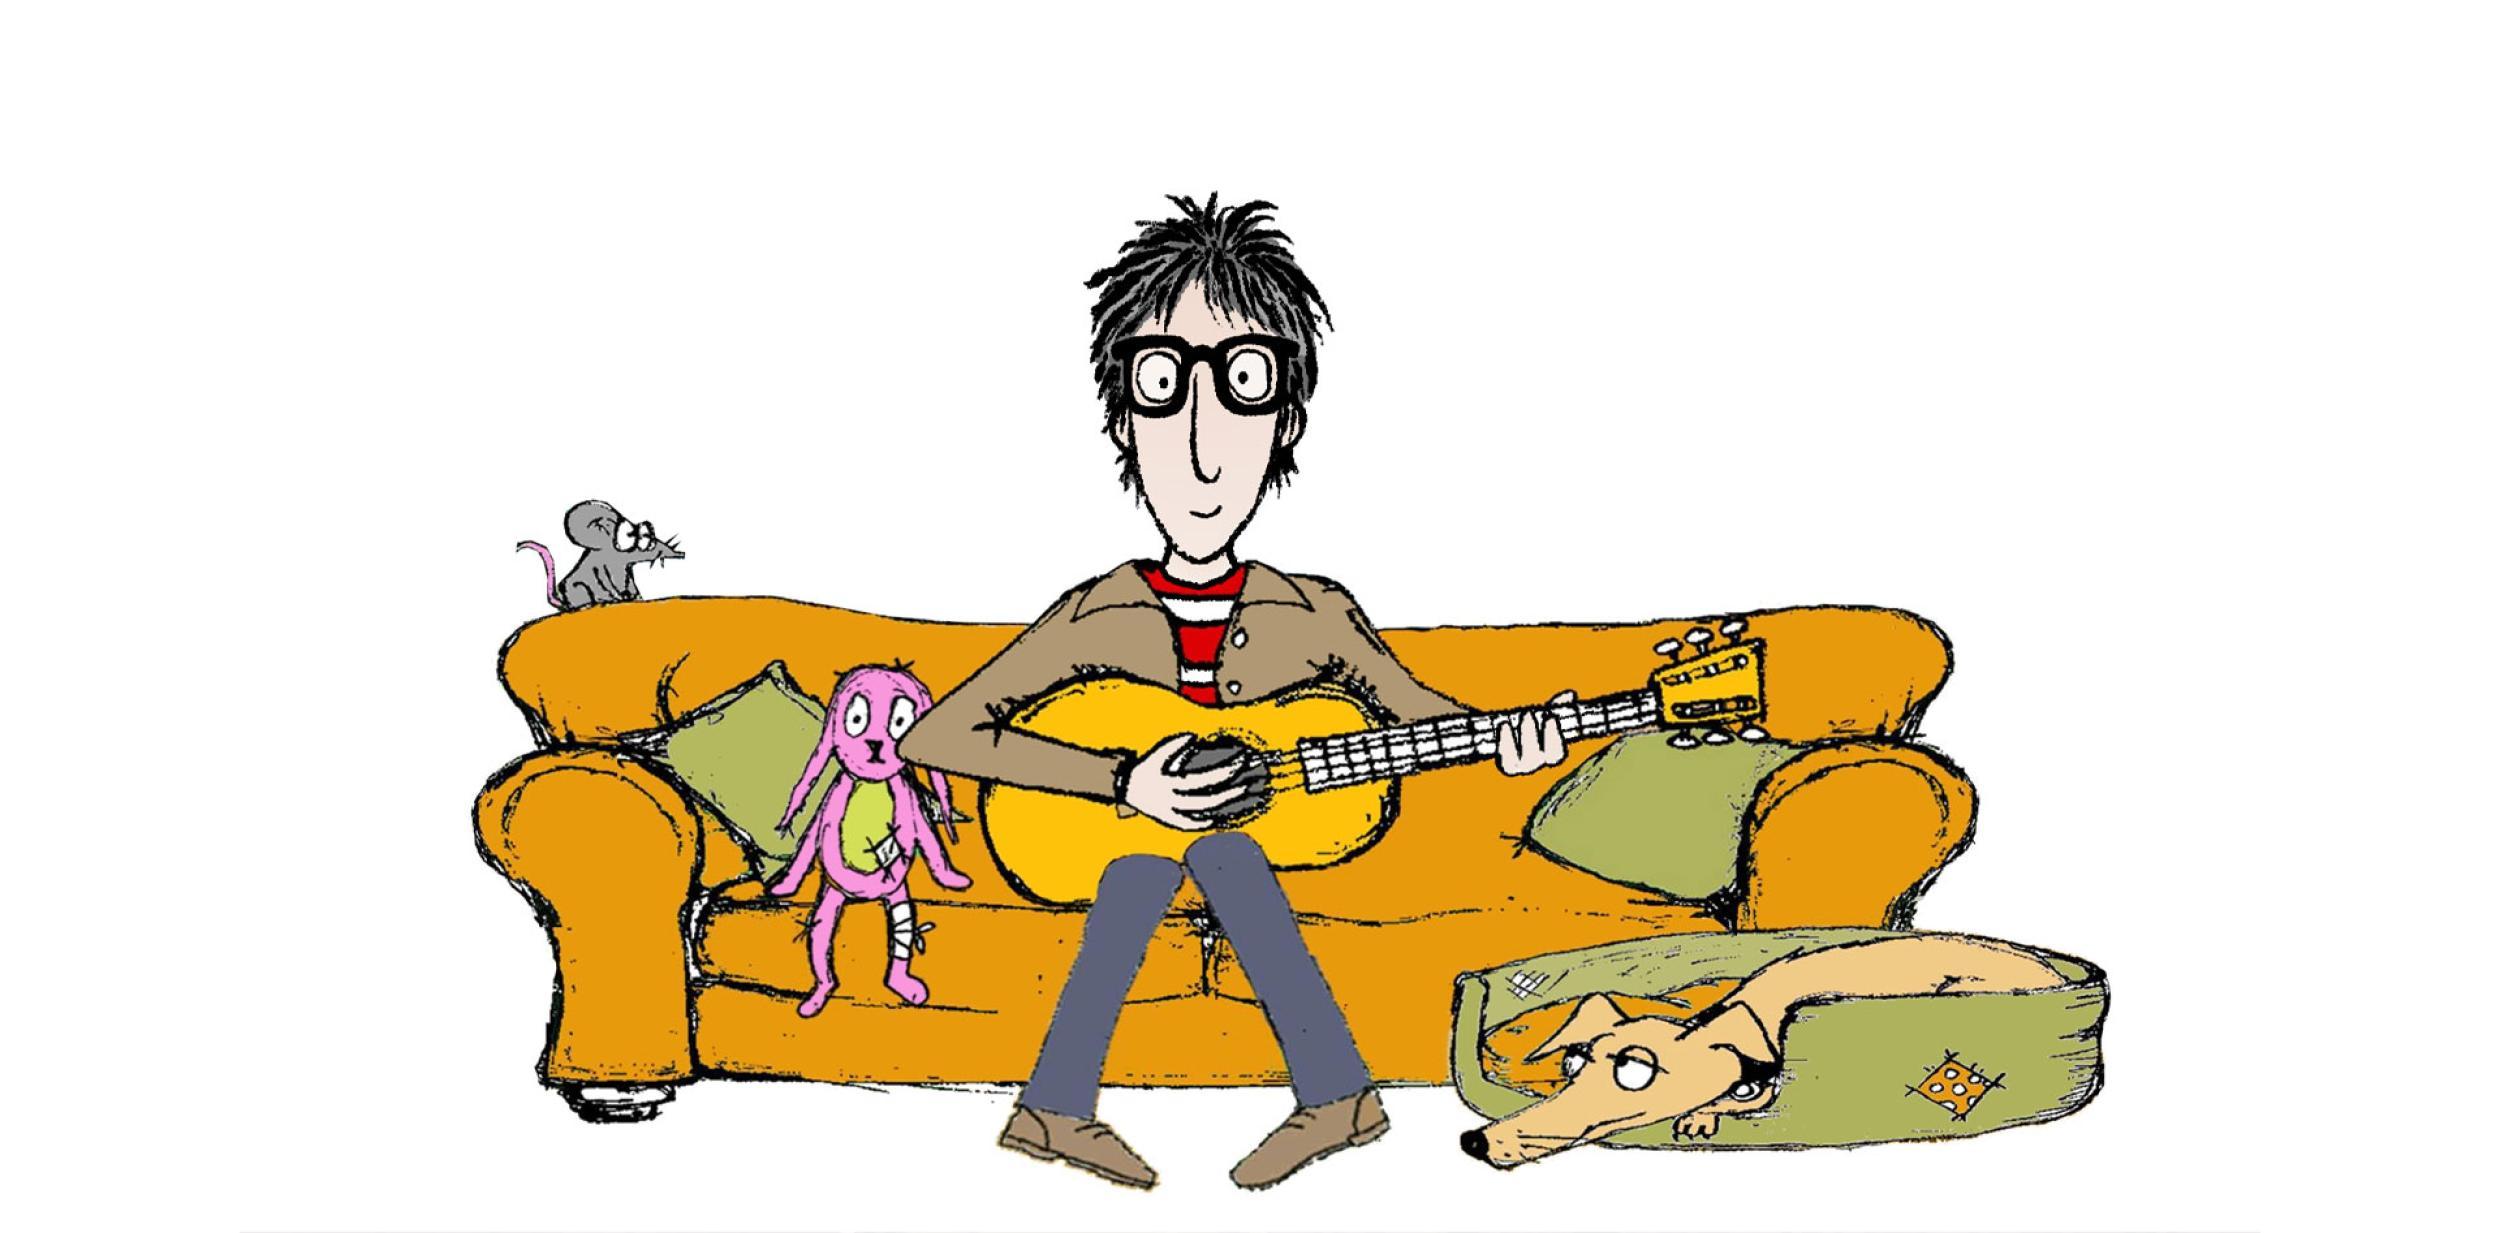 An illustration of Nick Cope sitting on a sofa and playing a guitar